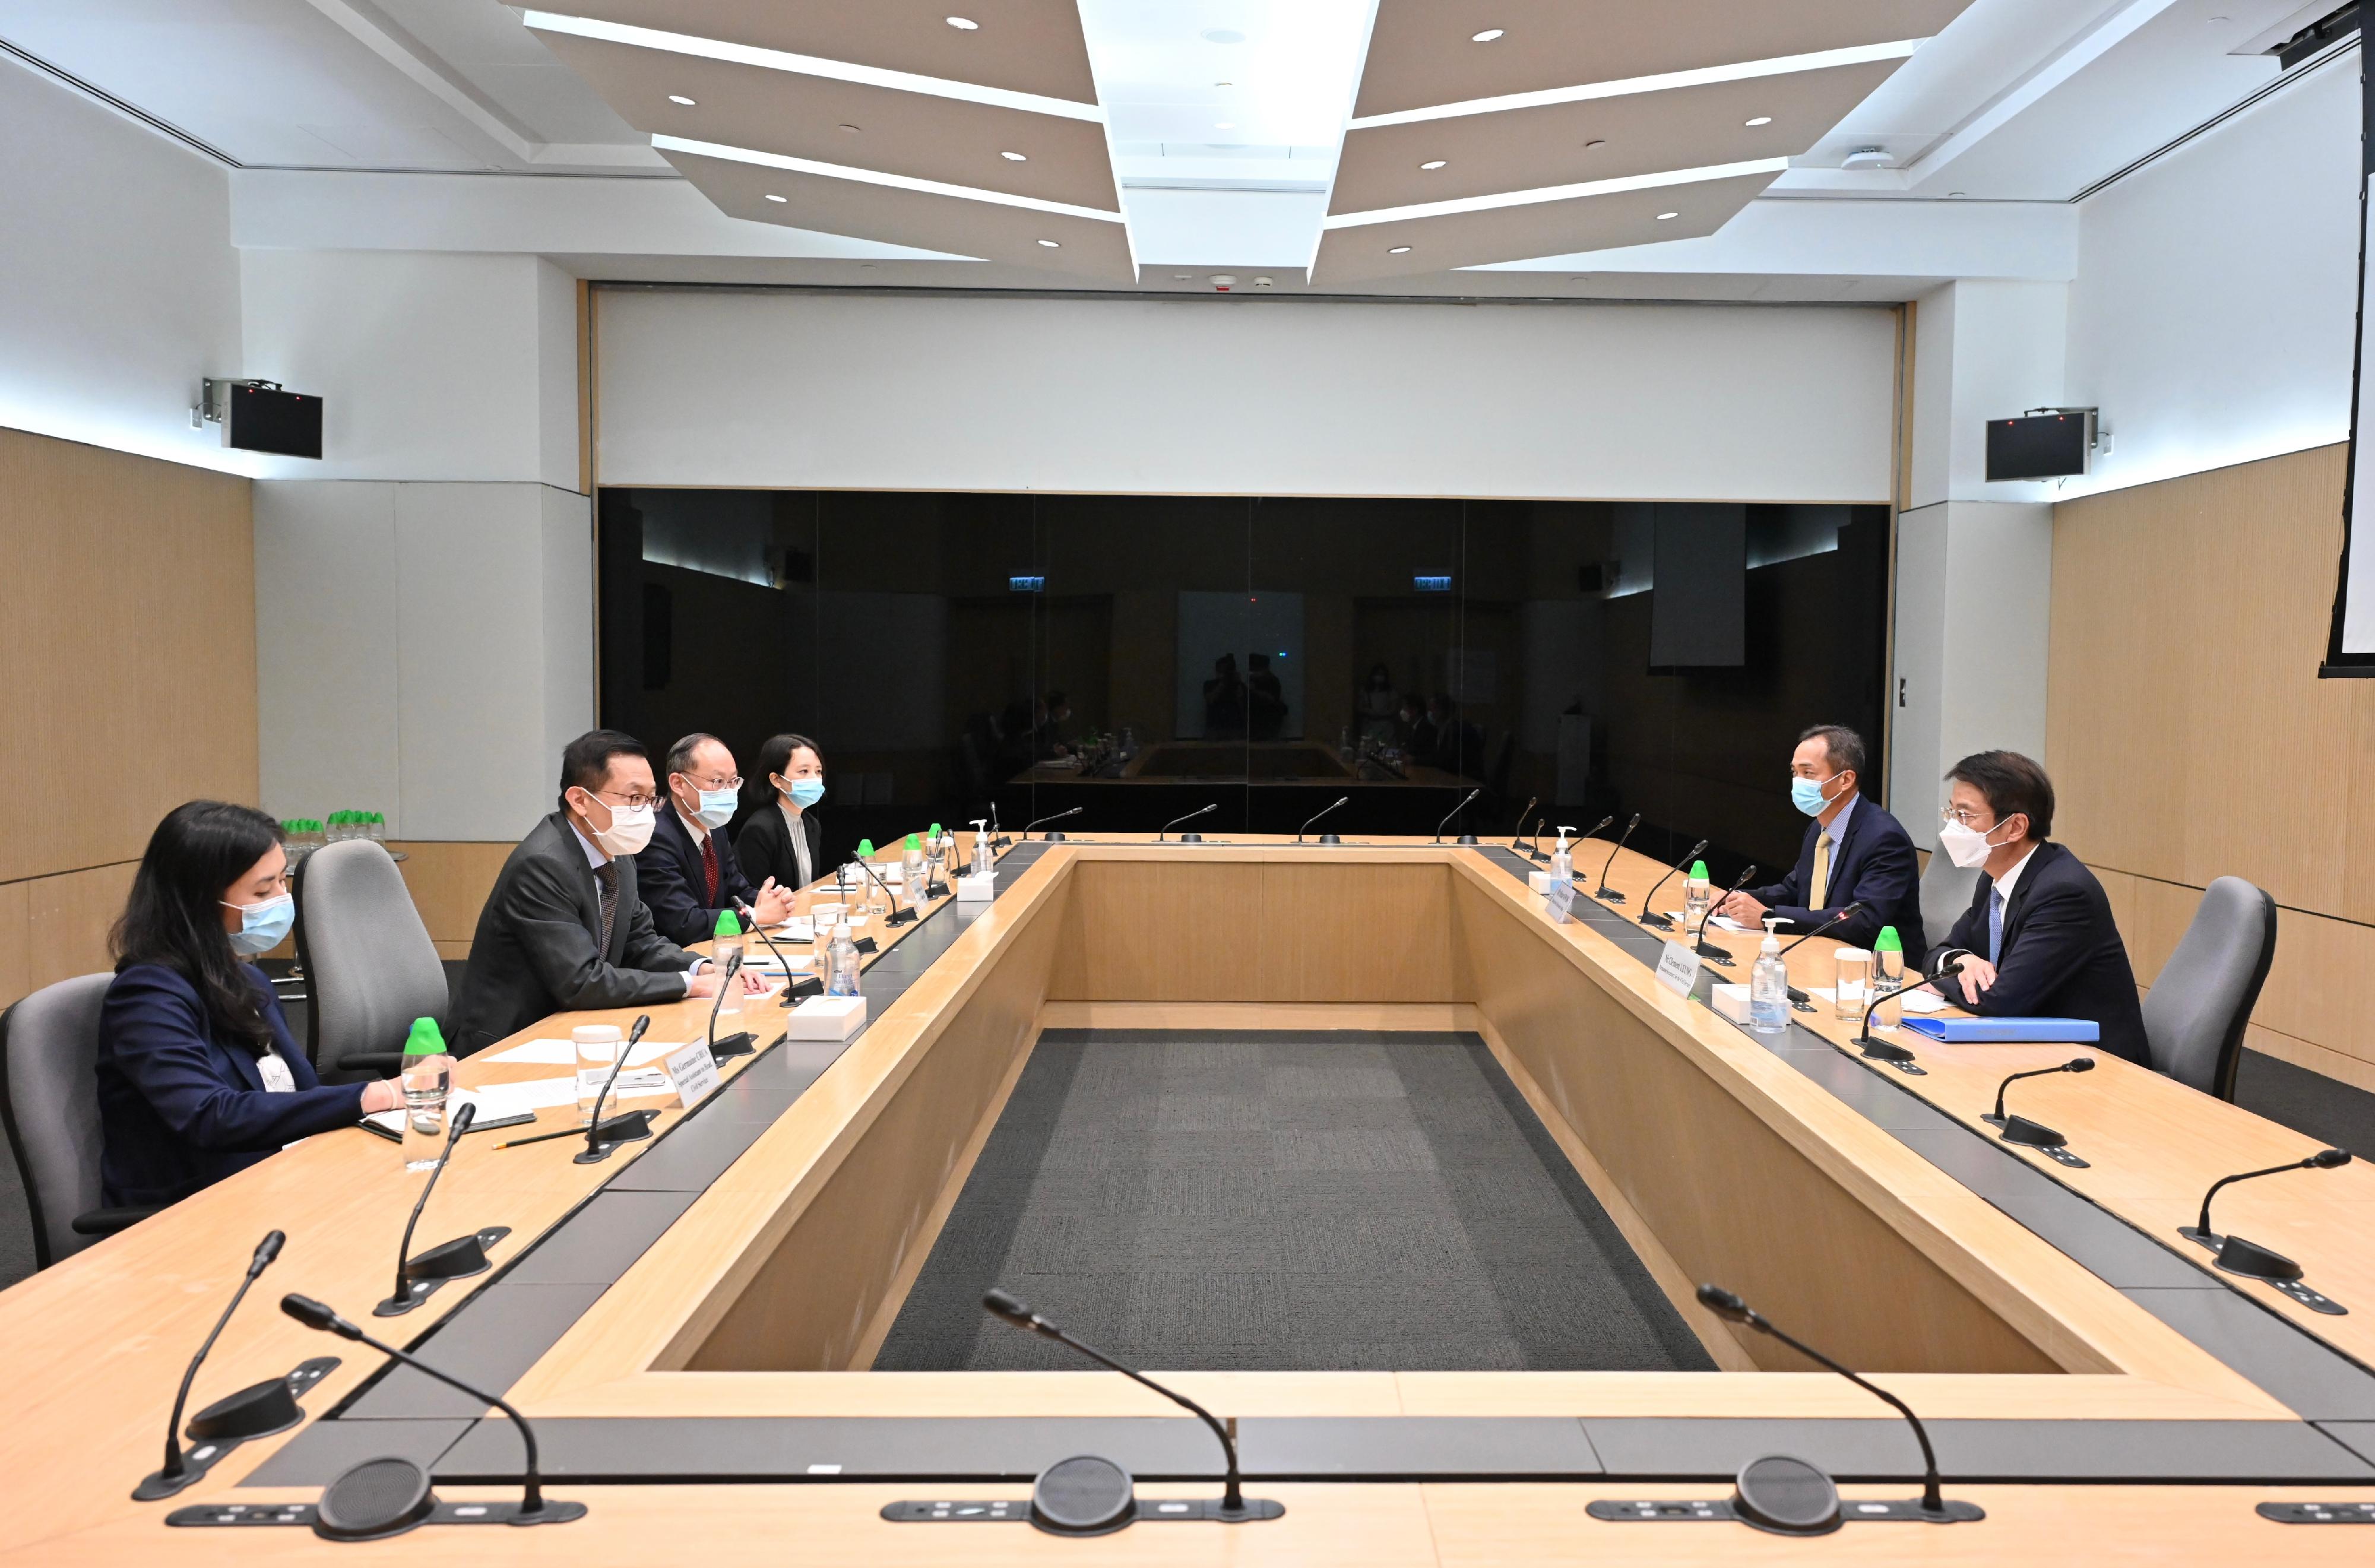 The Permanent Secretary for the Civil Service, Mr Clement Leung (first right), accompanied by the Head of the Civil Service College, Mr Oscar Kwok (second right), meets with the Head of Civil Service of Singapore, Mr Leo Yip (second left), on enhancing training and co-operation between the two civil services at the Central Government Offices today (July 20). The Consul-General of the Republic of Singapore in Hong Kong, Mr Ong Siew Gay (third left), was also present at the meeting.